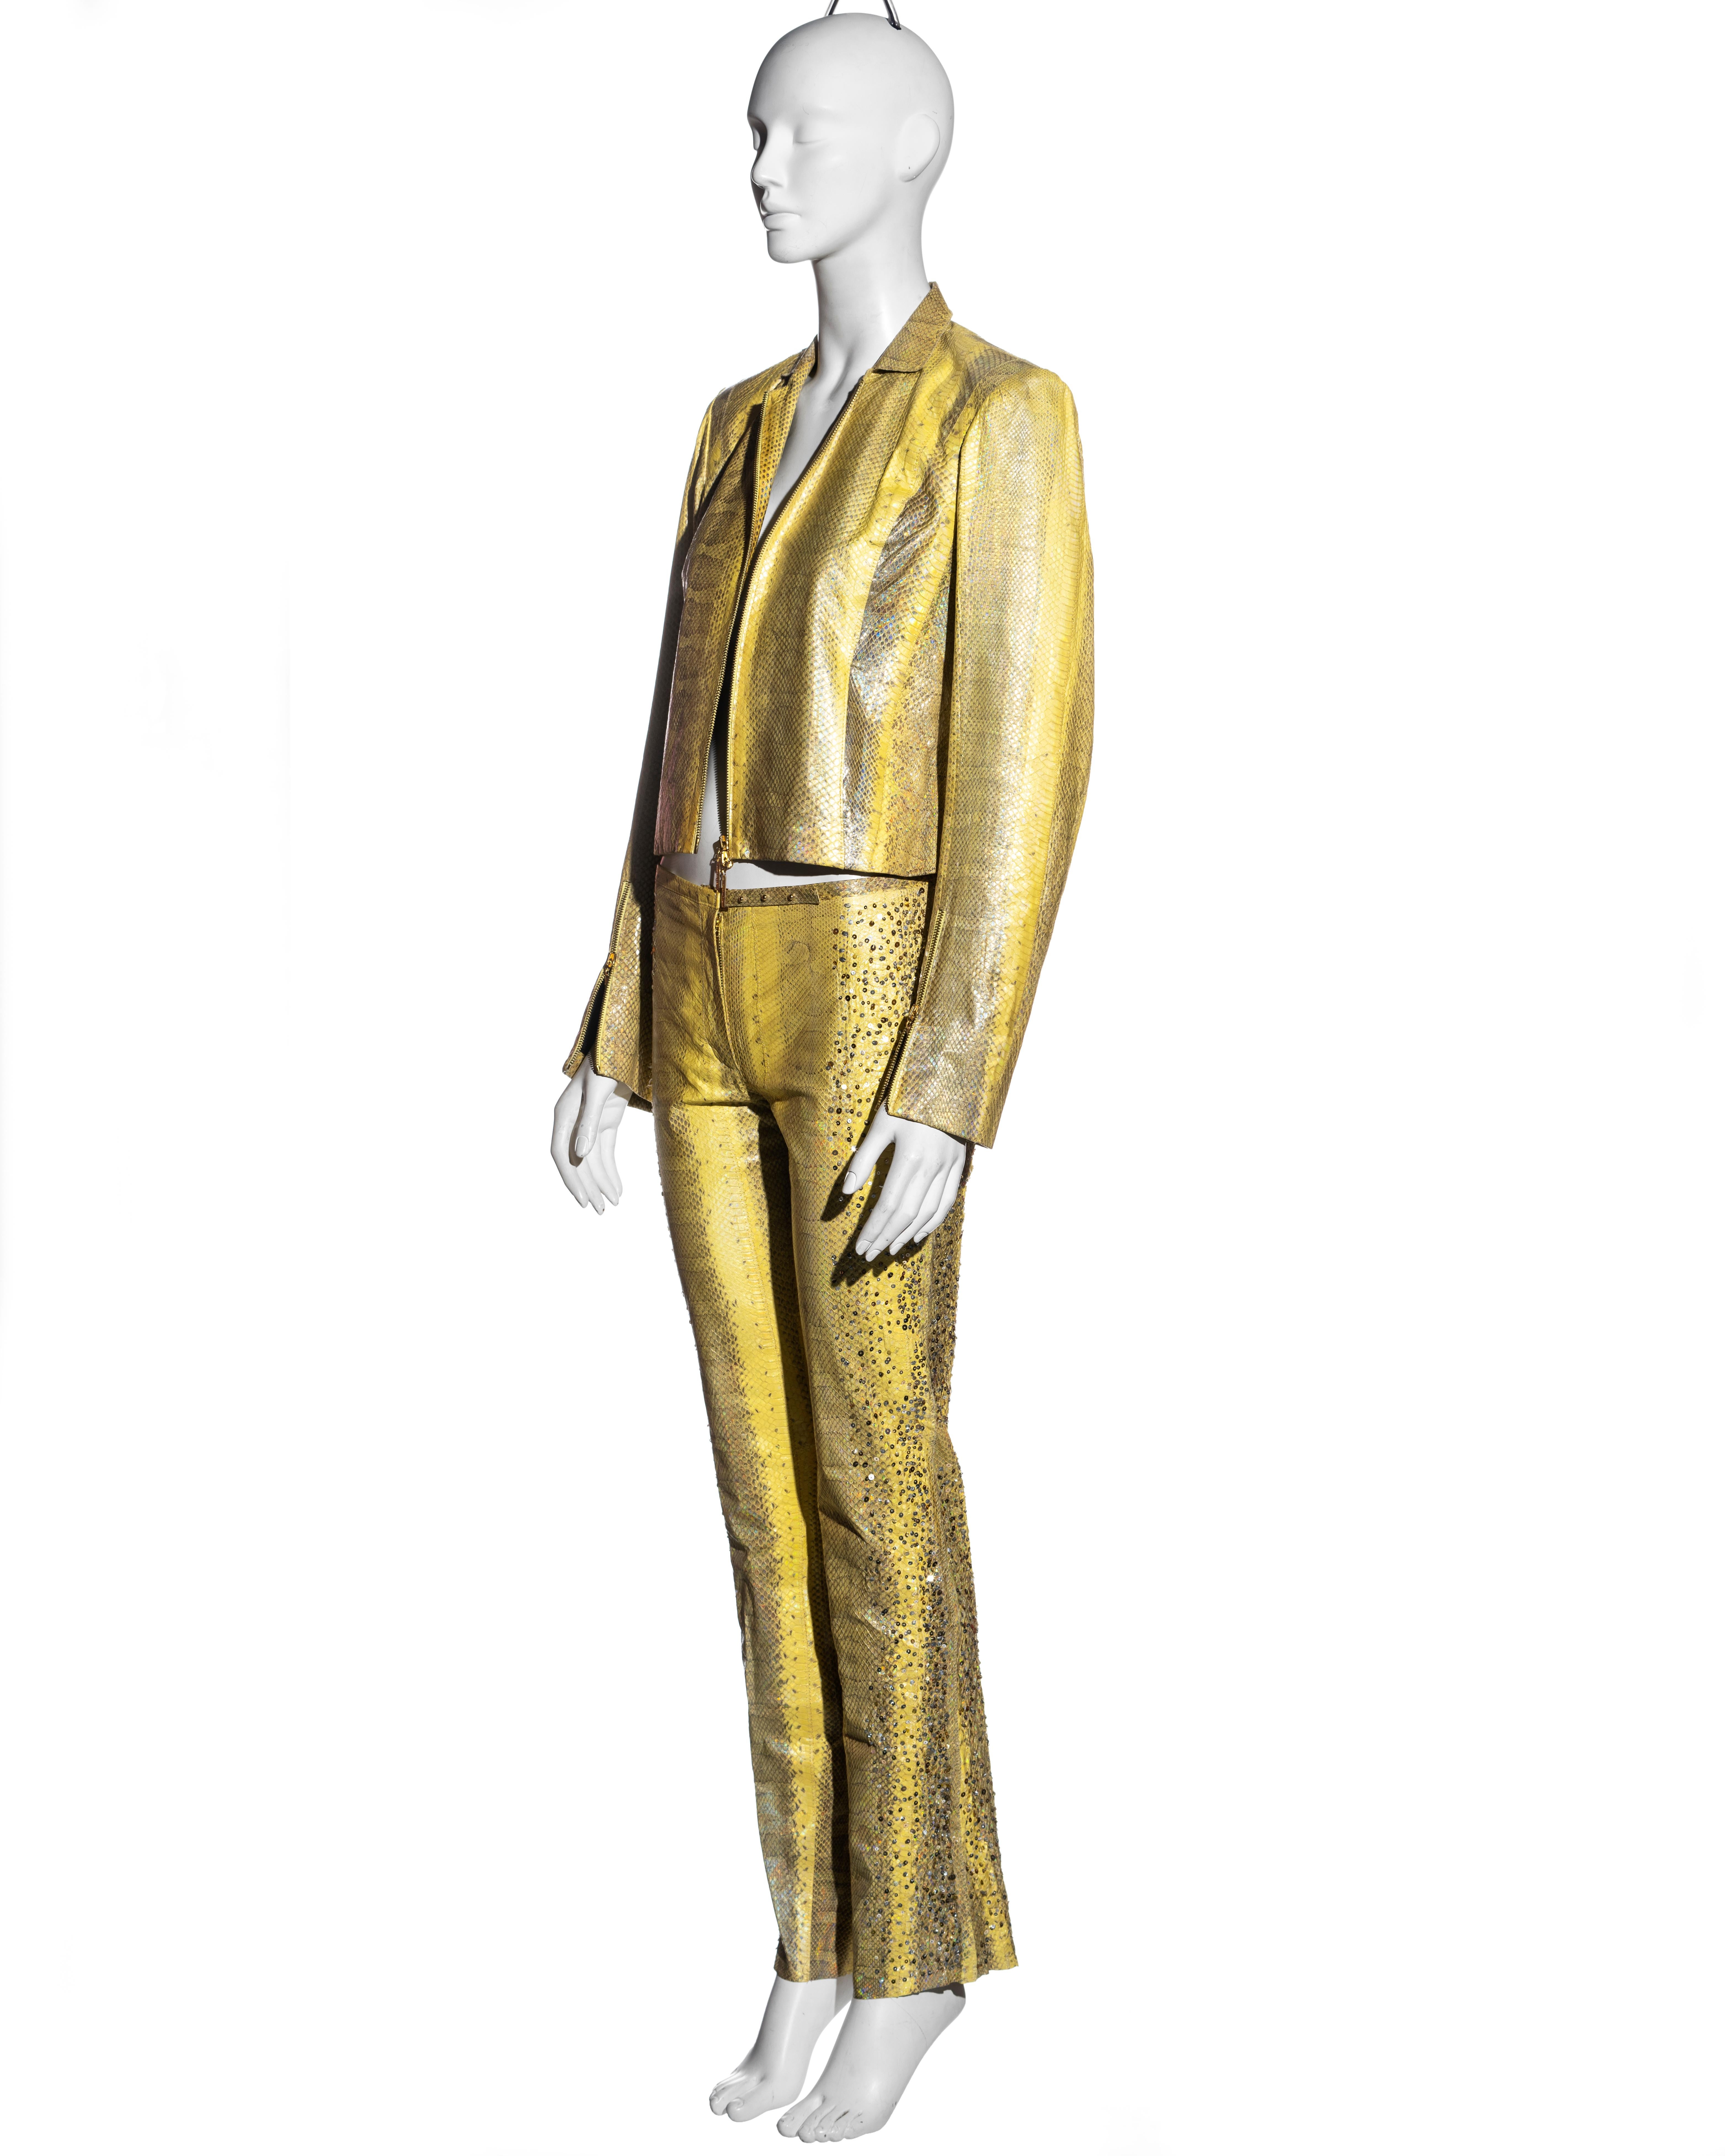 Roberto Cavalli yellow iridescent snakeskin pant suit with sequins, ss 2001 For Sale 1